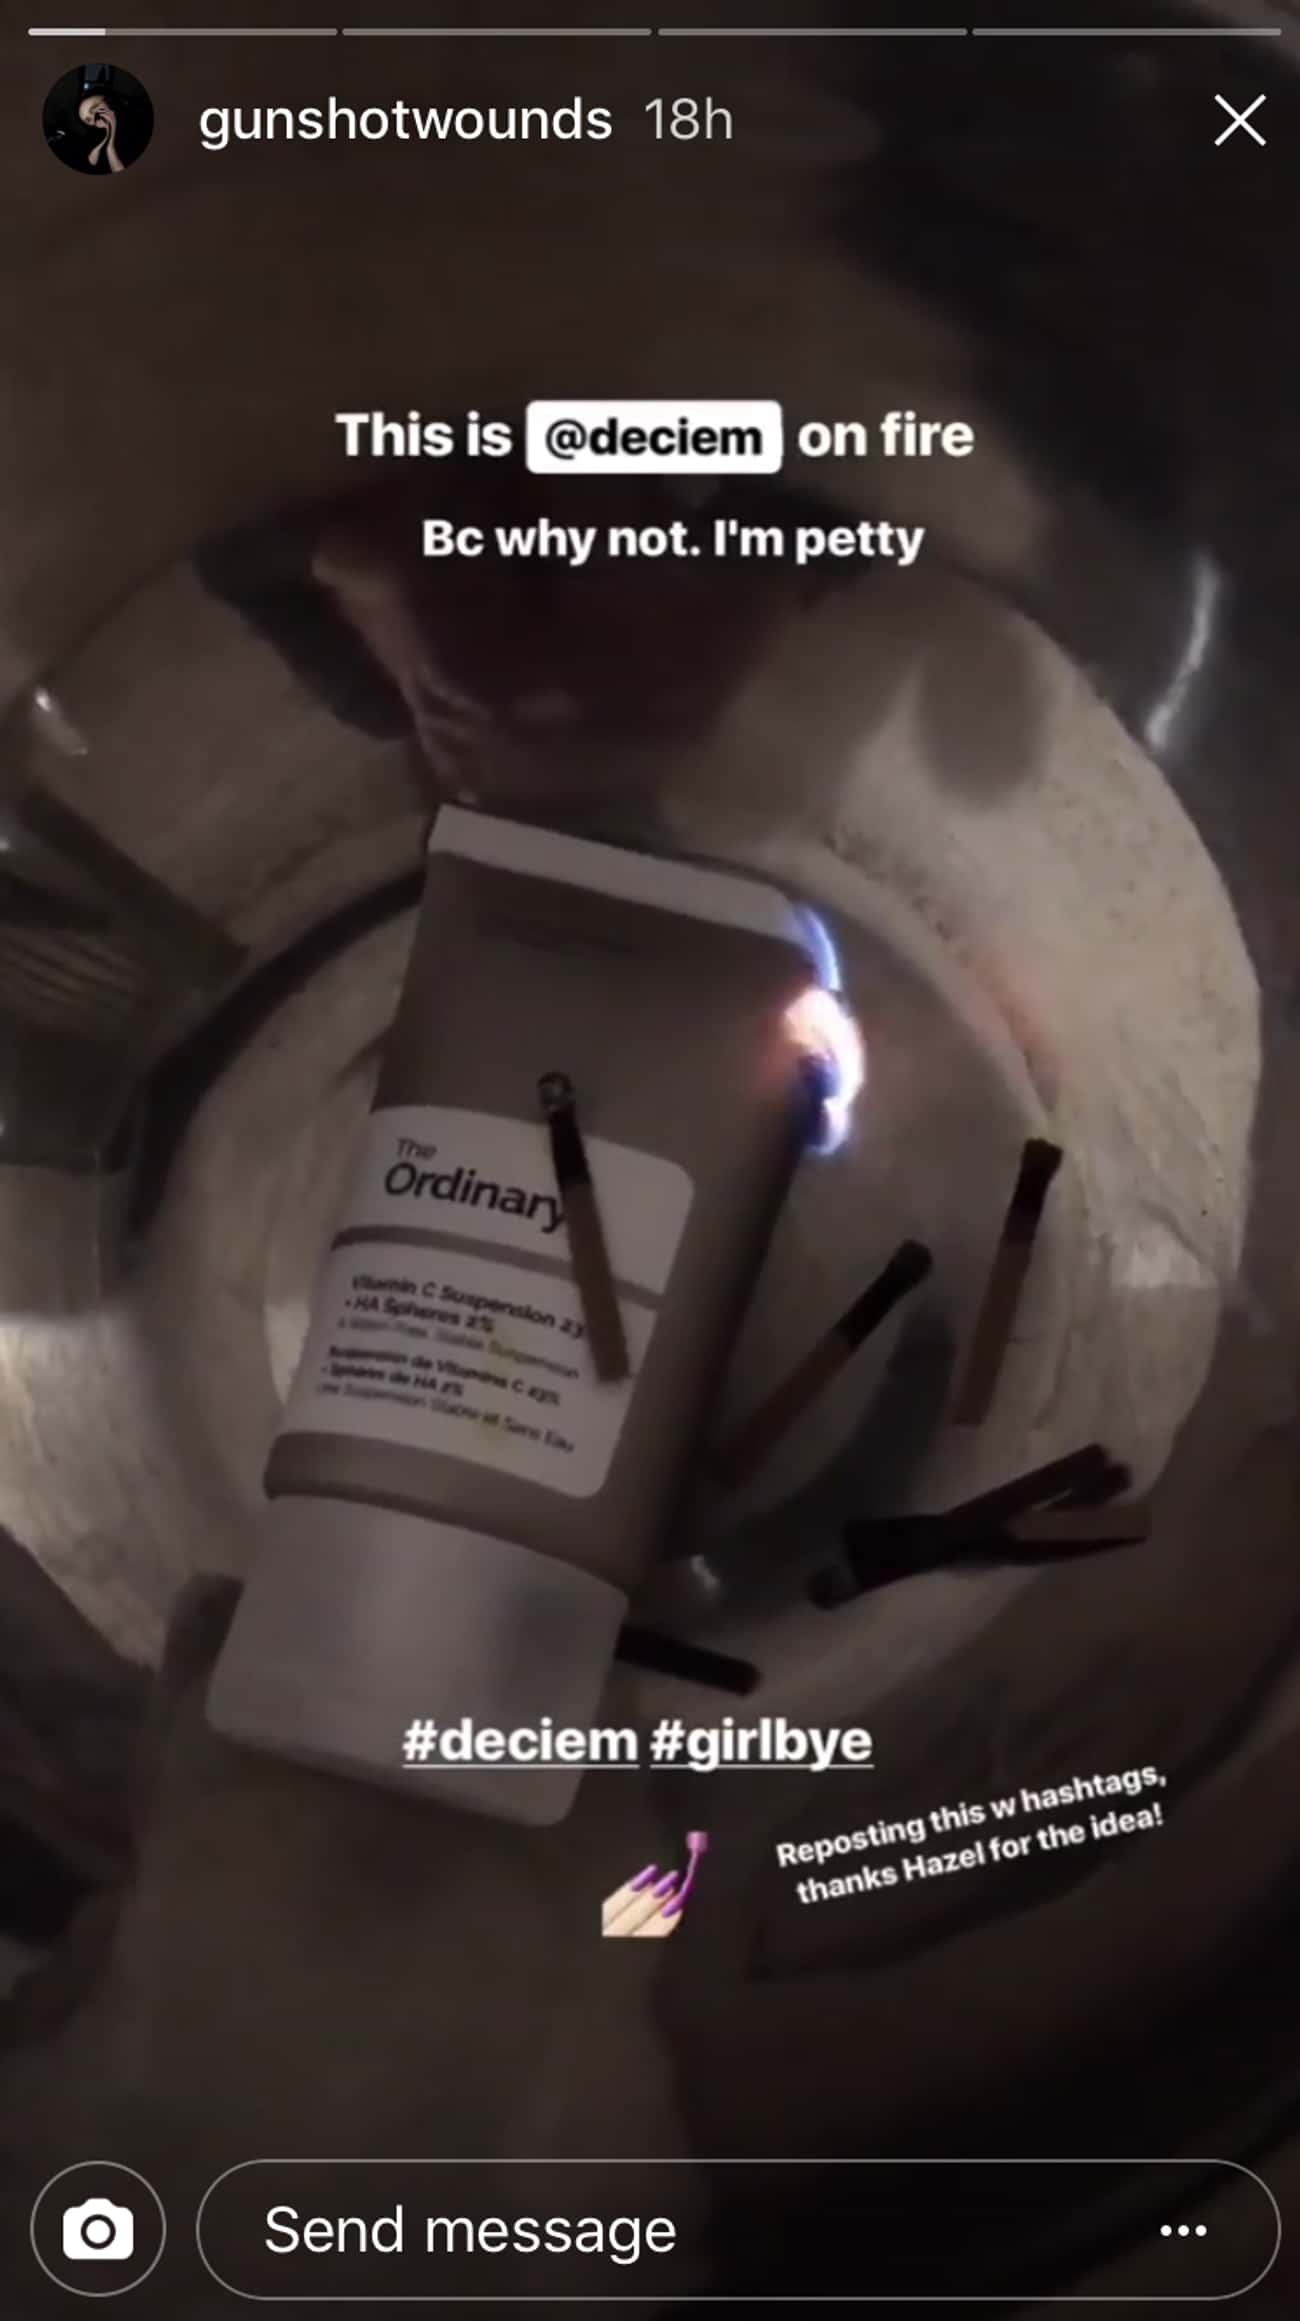 By The End Of Truaxe's Instagram Takeover, Fans Were Burning Their Deciem Products